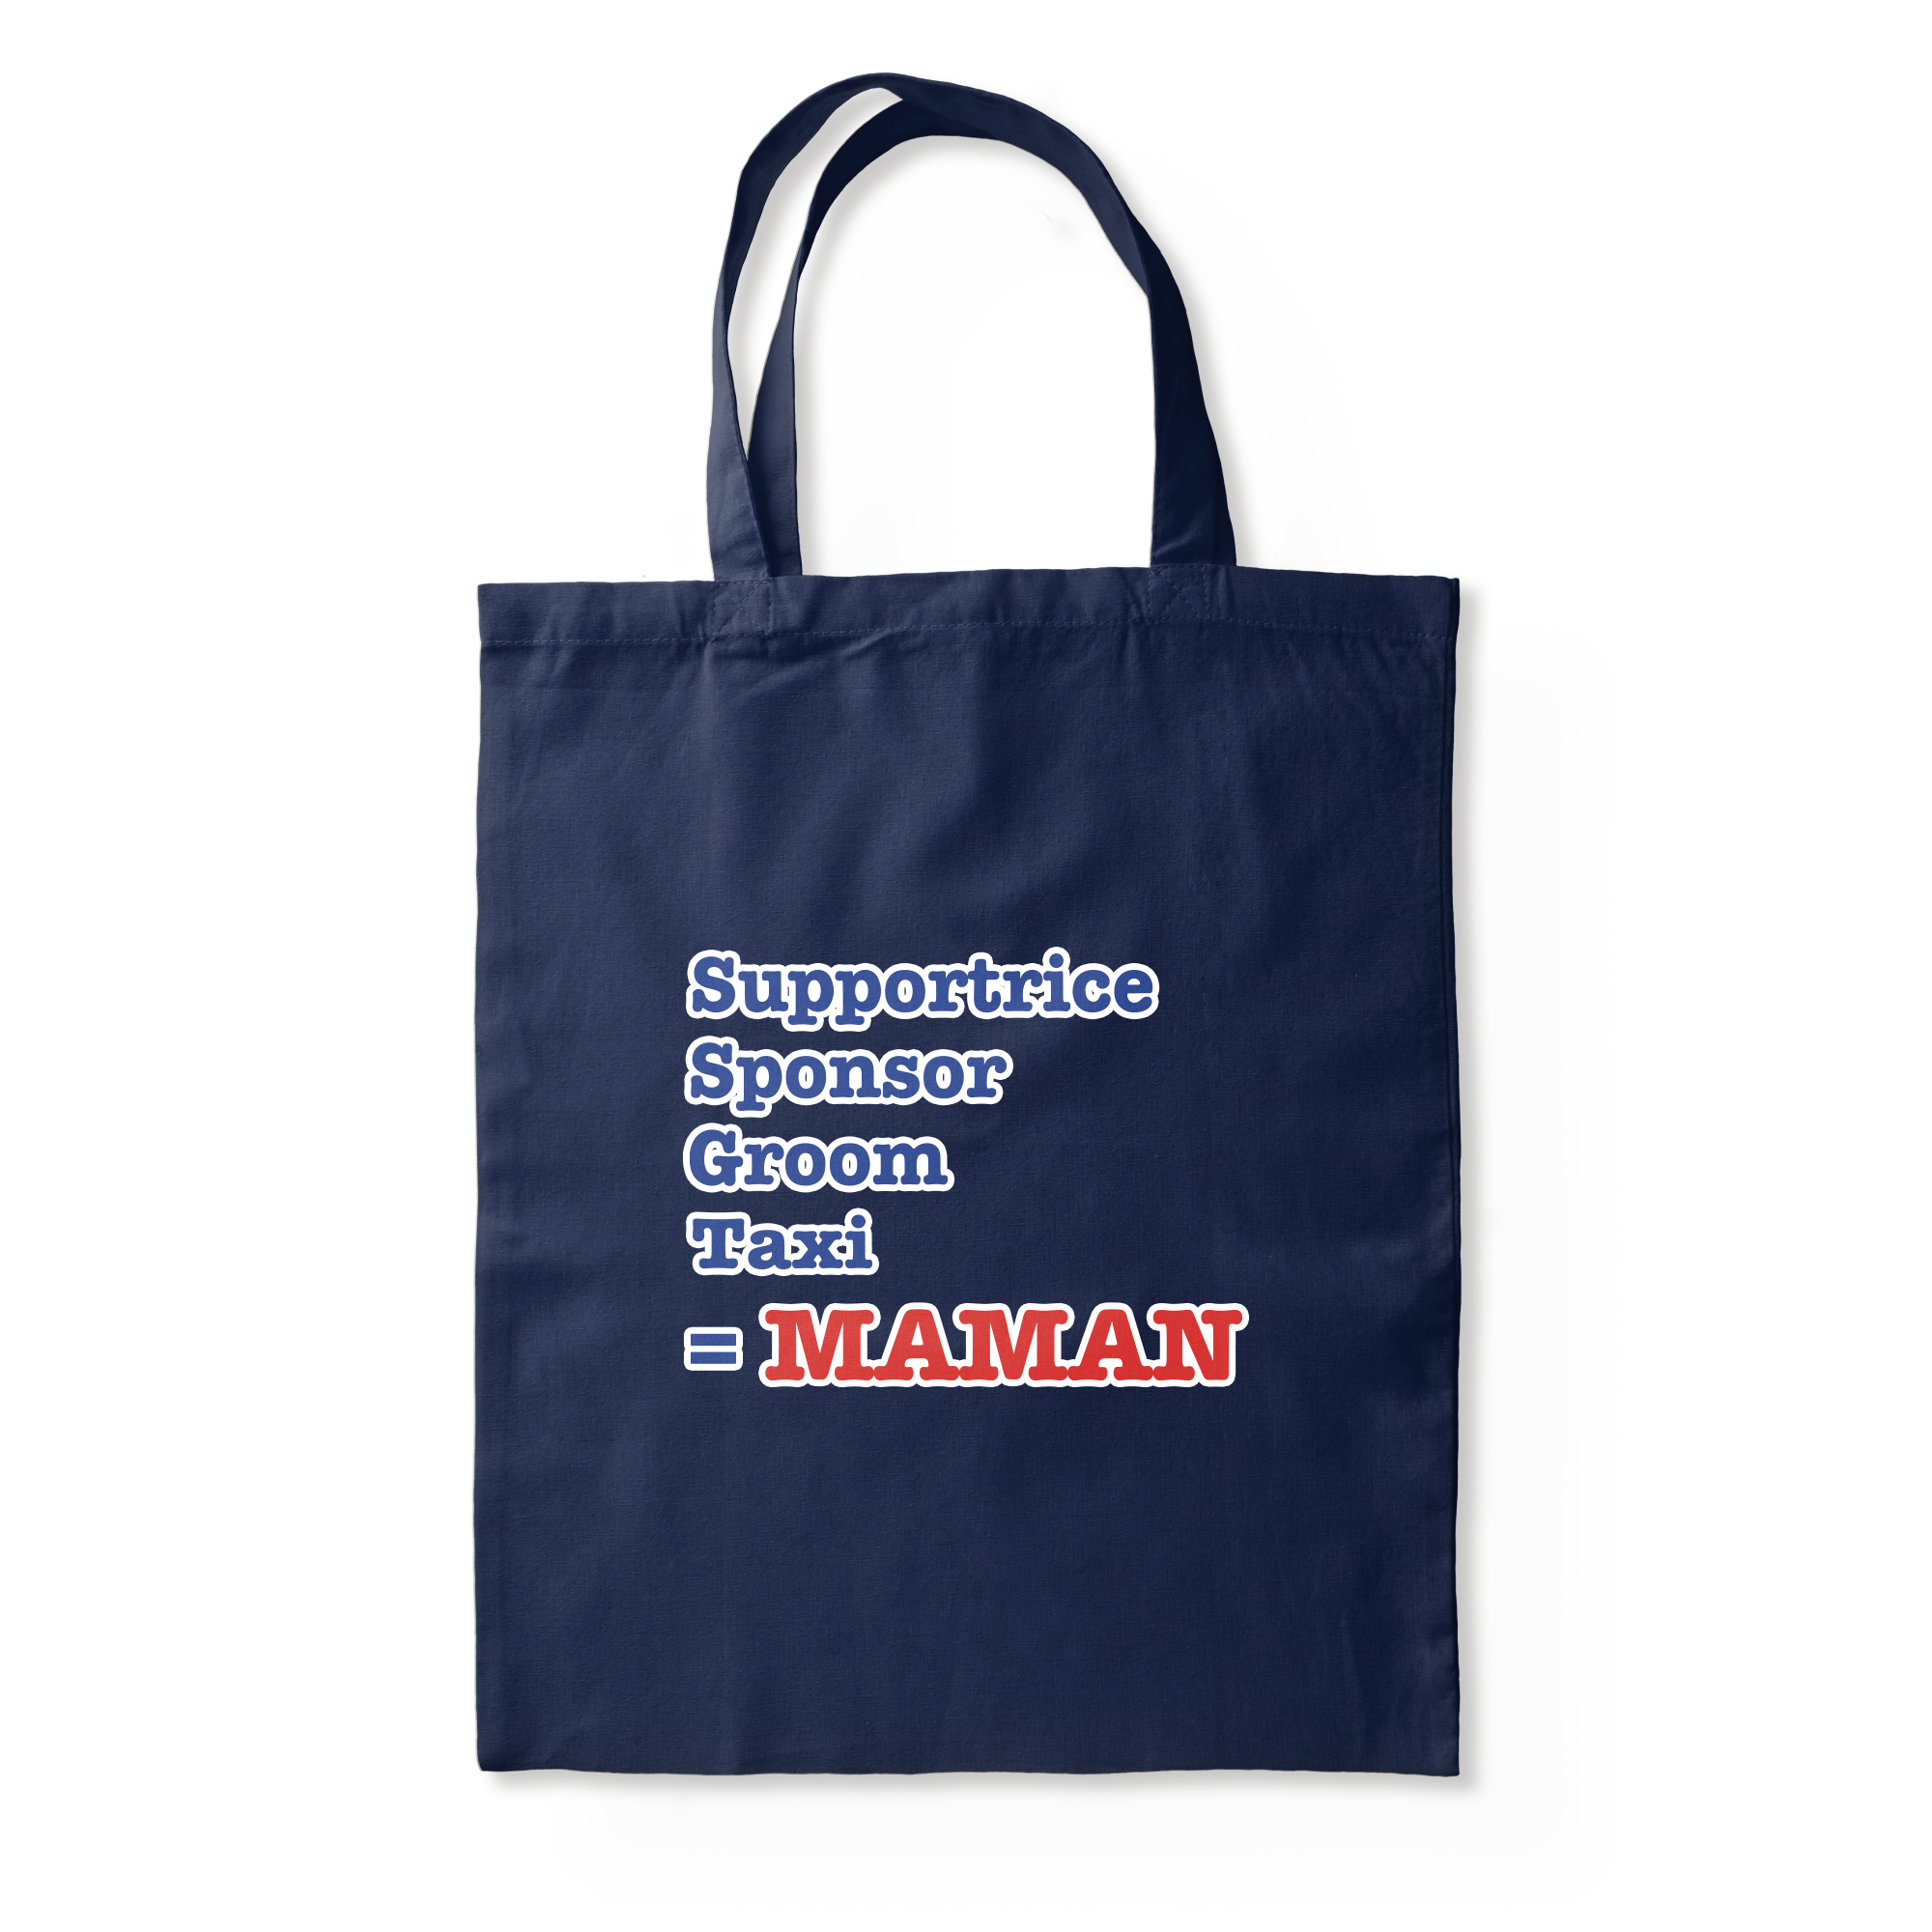 Supportrice, Sponsor ... = MAMAN - TOTE BAG